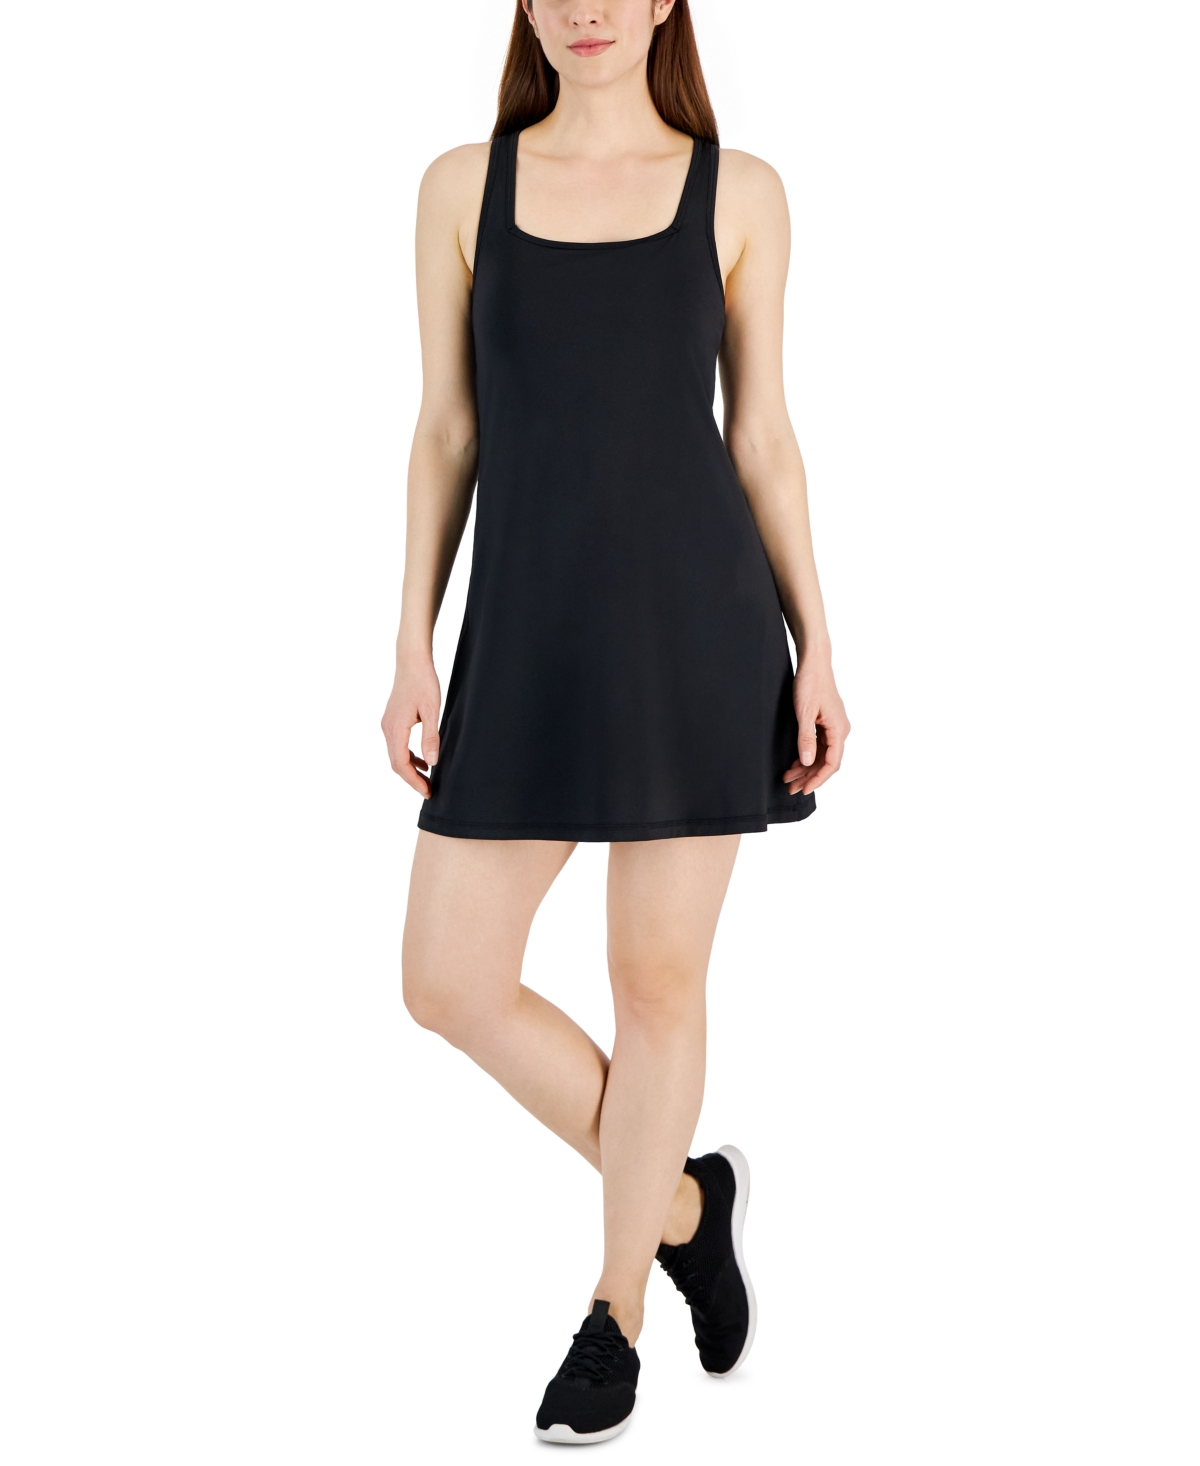 Women's Performance Square-Neck Dress, Created for Macy's - Bright White